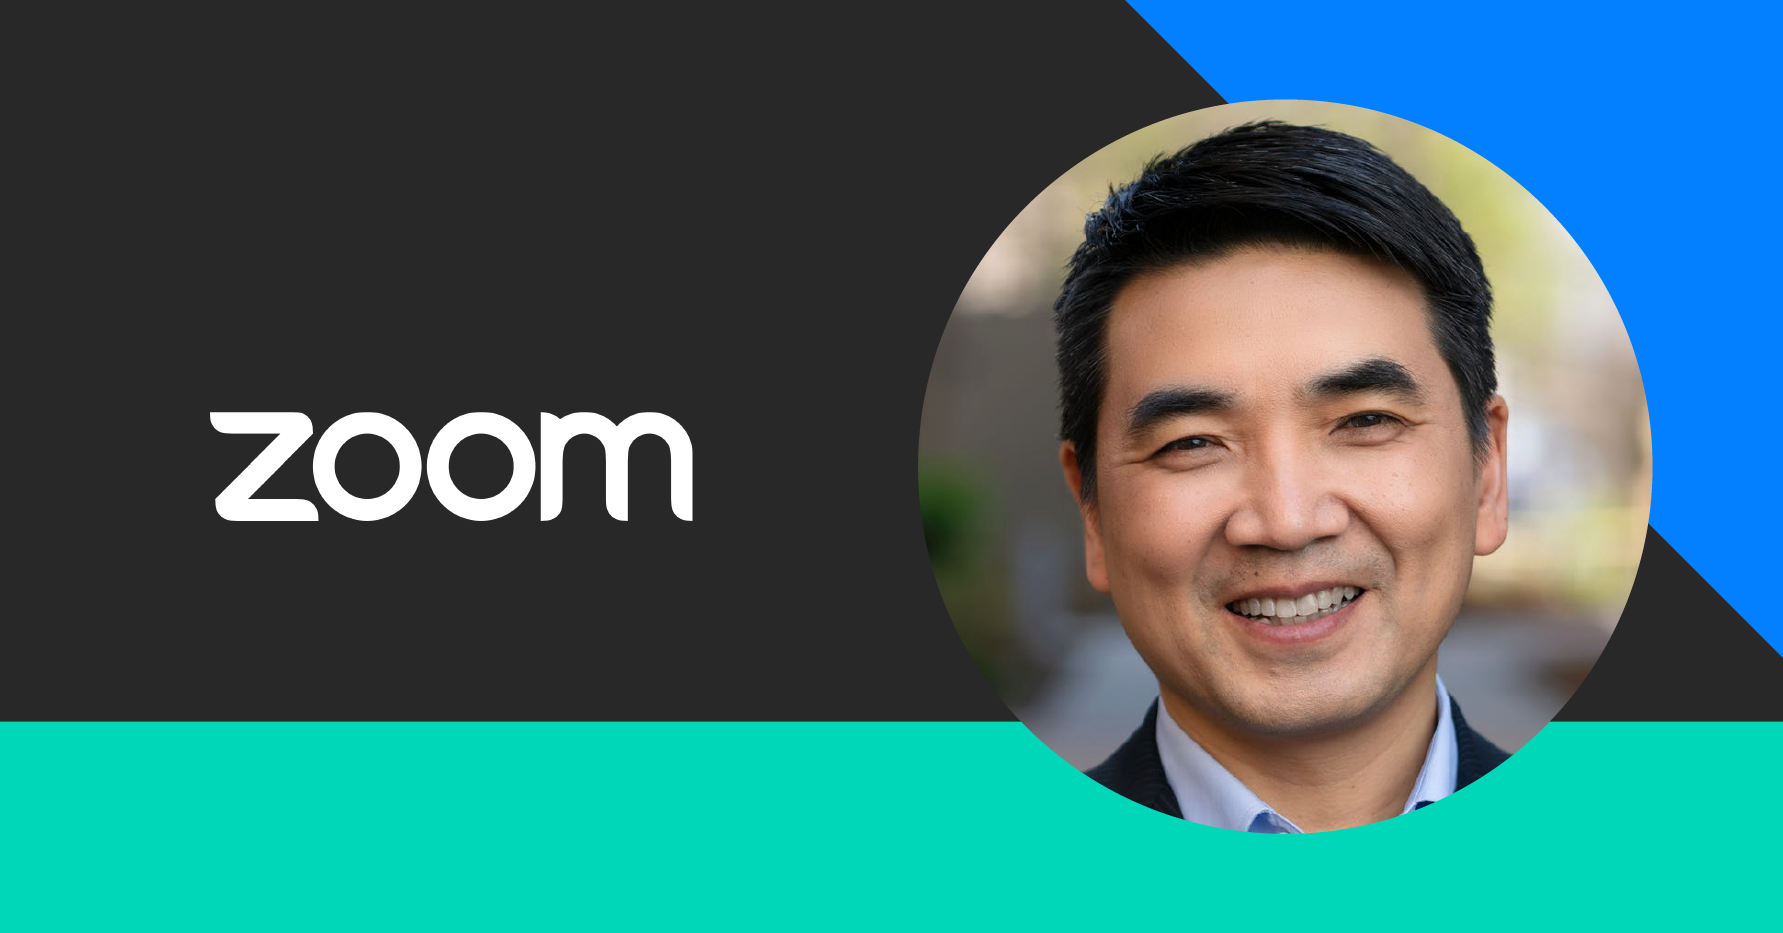 Banner image with Zoom logo and headshot photograph of Eric Yuan, CEO of Zoom